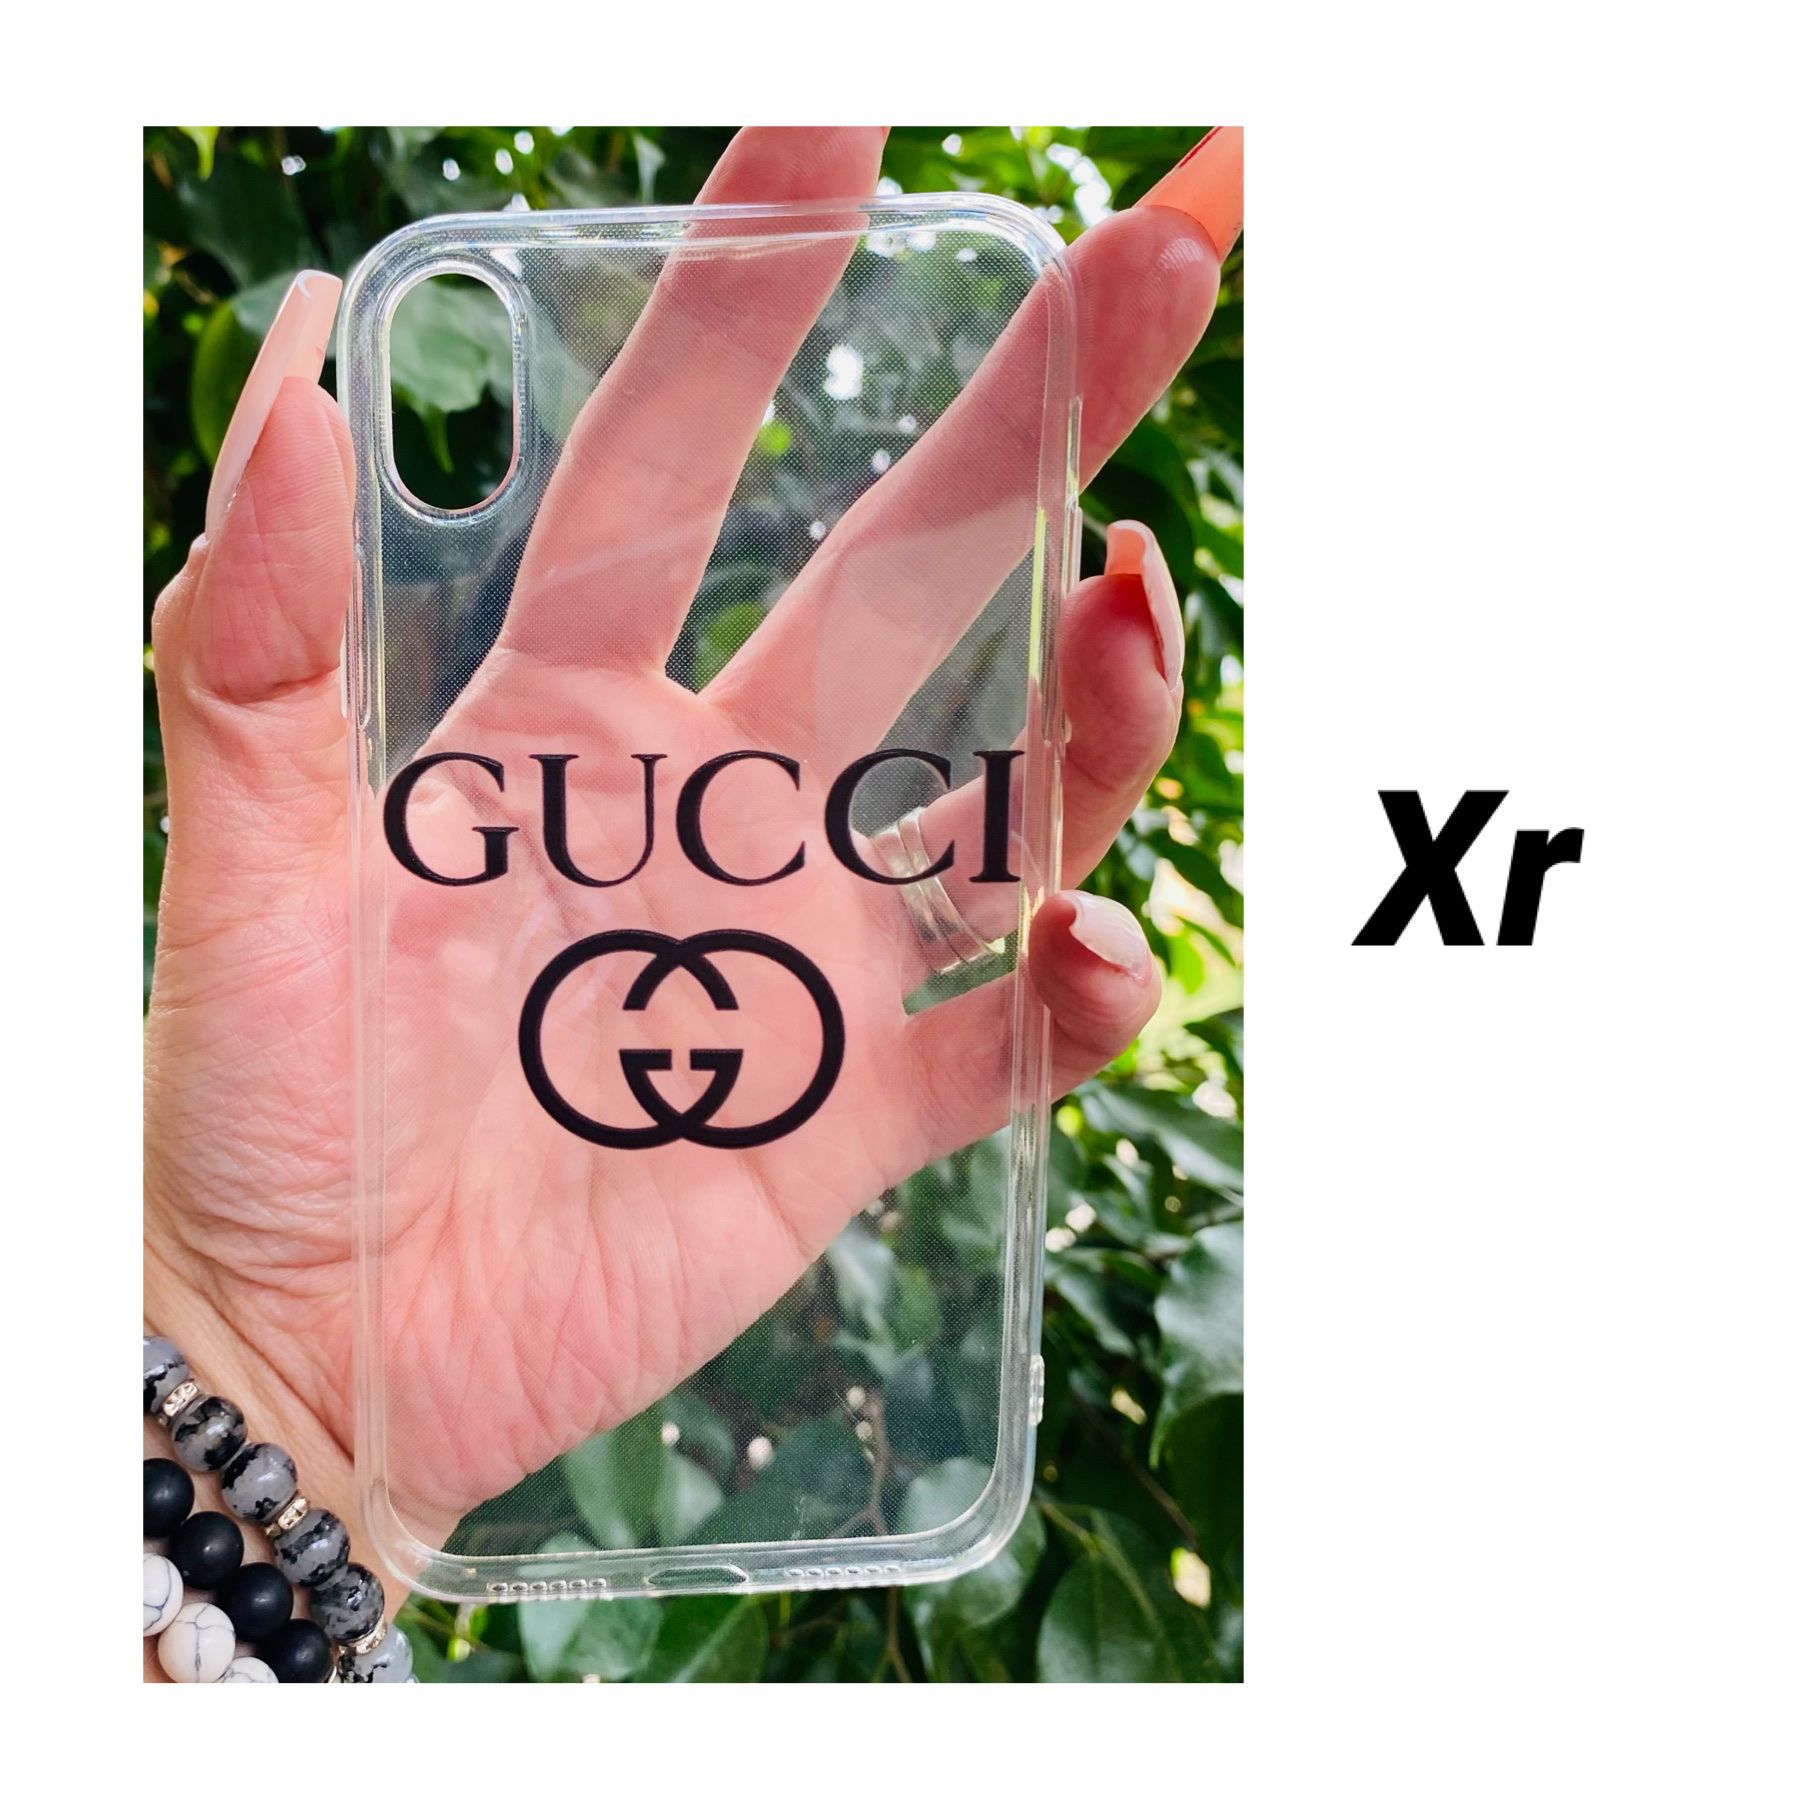 Brand new cool iphone XR case cover silicone rubber Clear transparent see through